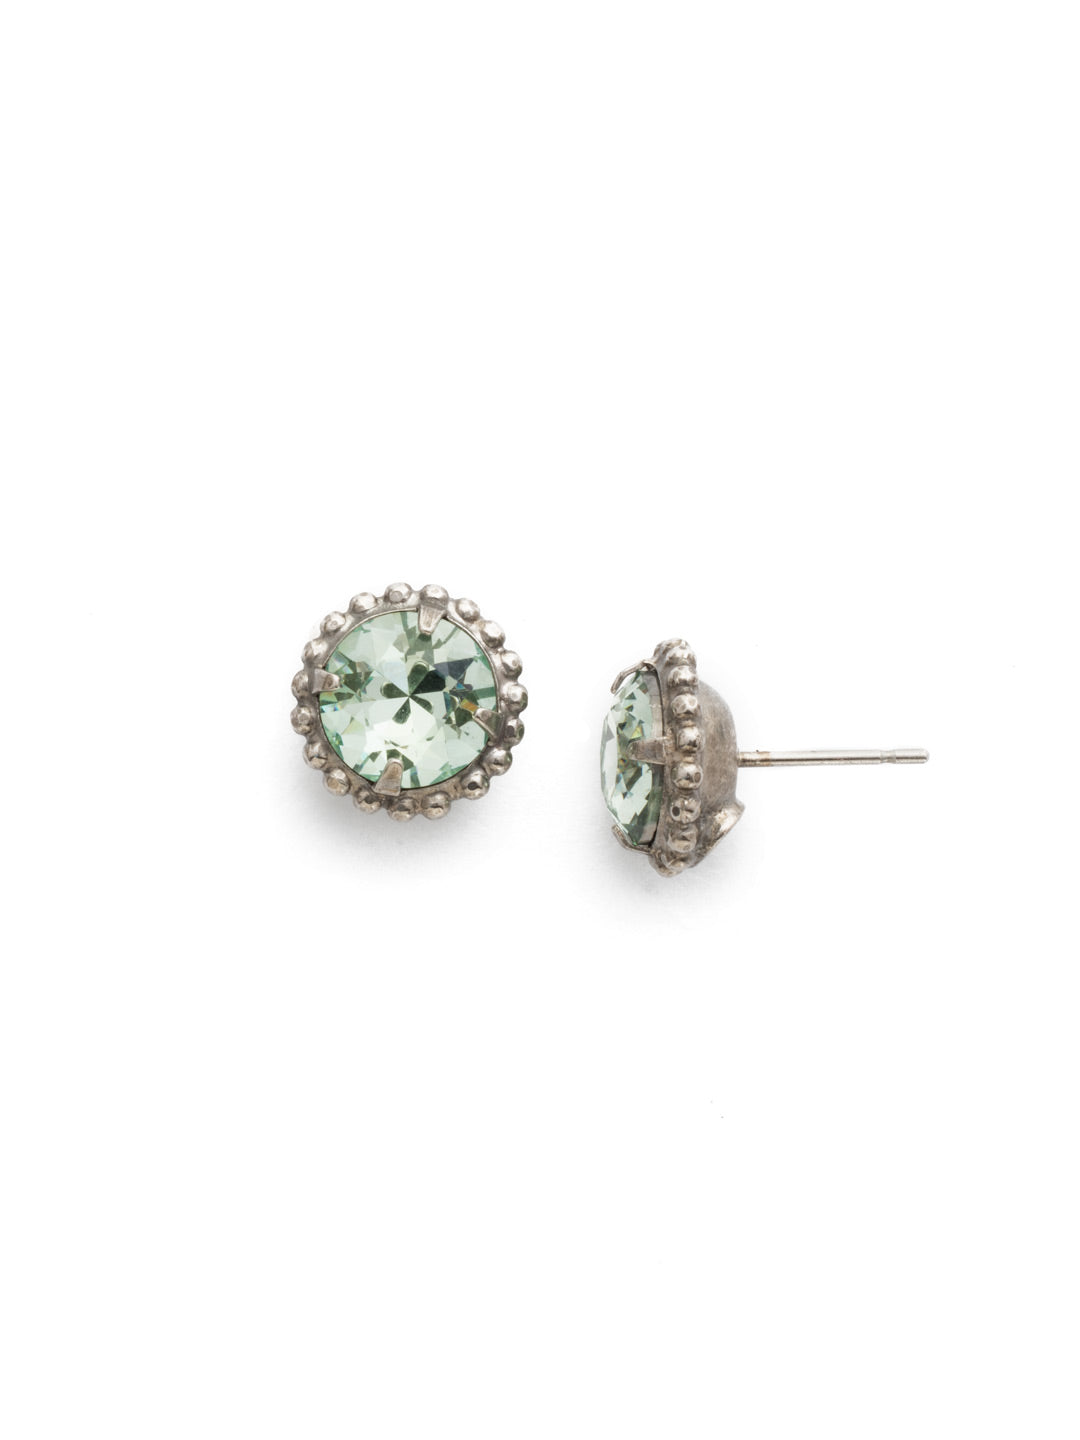 Simplicity Stud Earrings - EBY38ASMIN - <p>A timeless classic, the Simplicity Stud Earrings feature round cut crystals in a variety of colors; accented with a halo of metal beaded detail. Need help picking a stud? <a href="https://www.sorrelli.com/blogs/sisterhood/round-stud-earrings-101-a-rundown-of-sizes-styles-and-sparkle">Check out our size guide!</a> From Sorrelli's Mint collection in our Antique Silver-tone finish.</p>